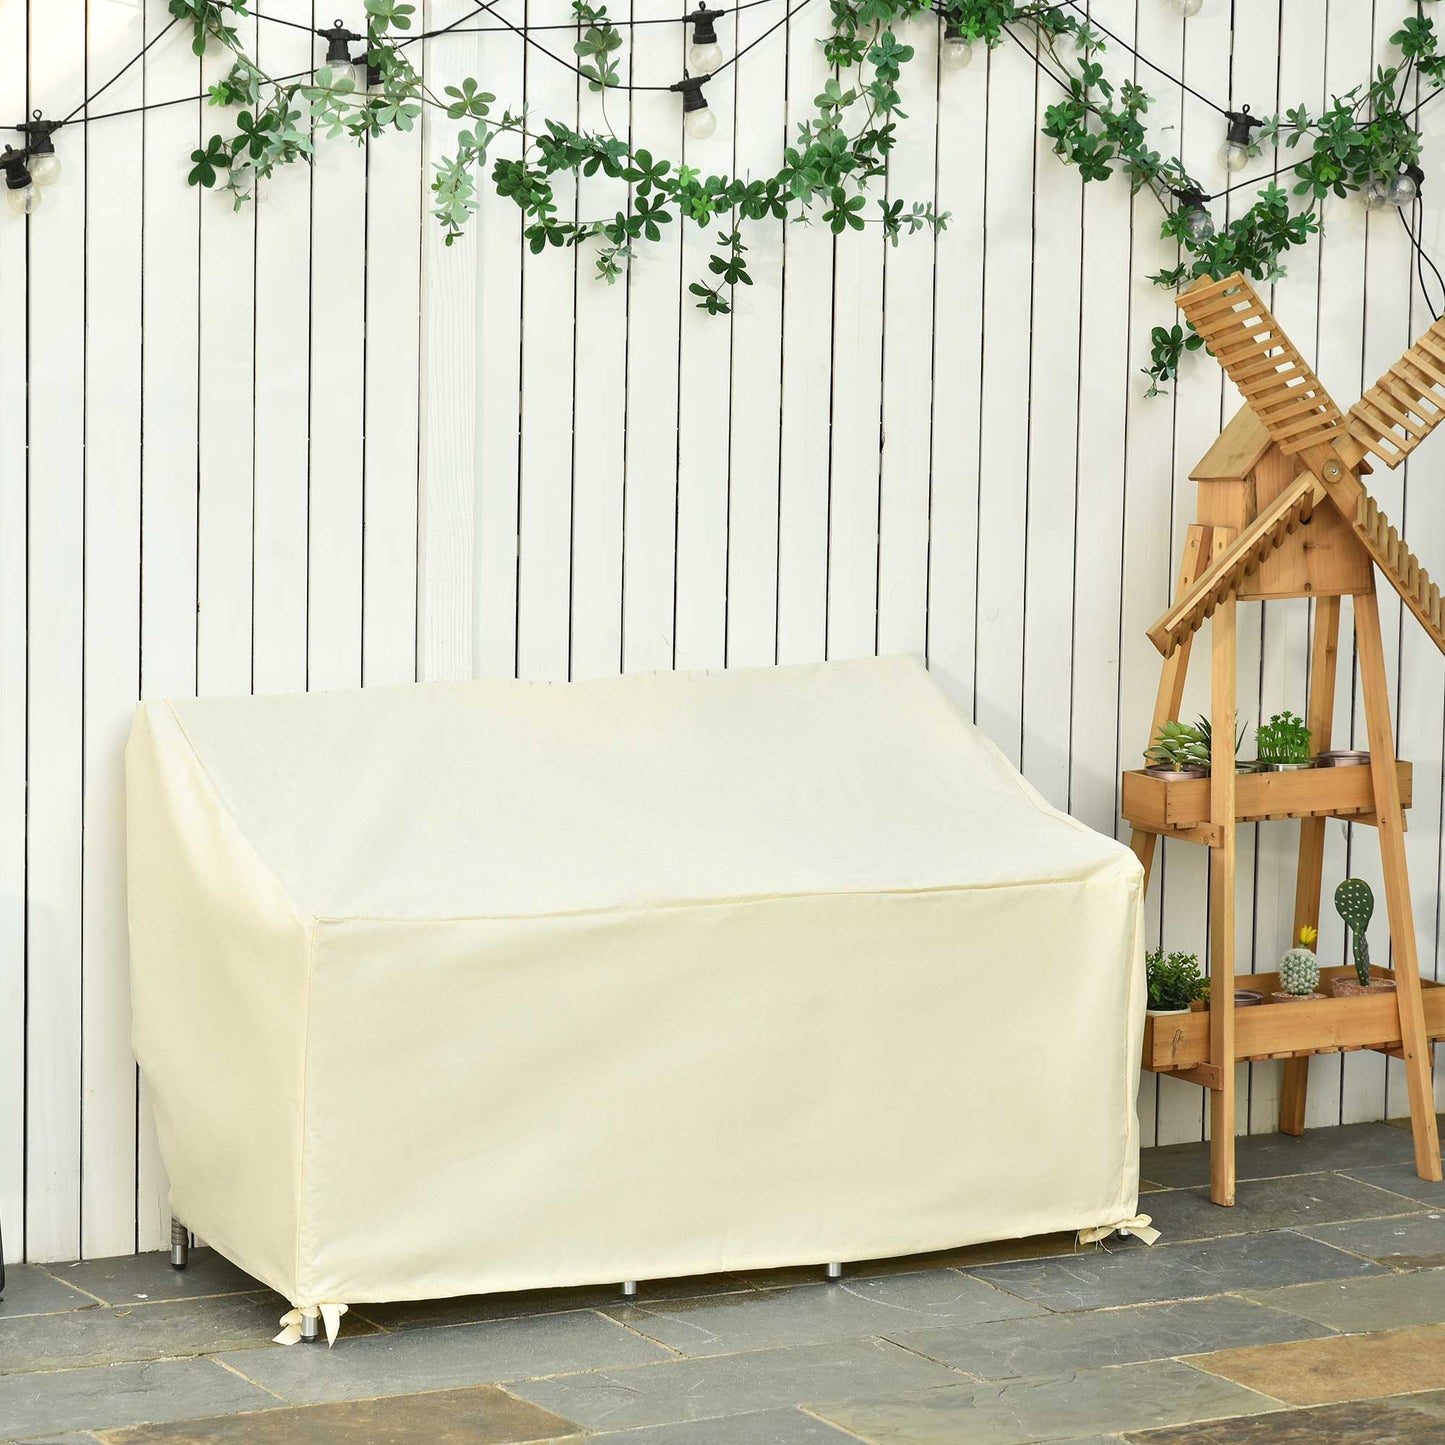 Outsunny Outdoor Furniture Cover 2 Seater Loveseat Protection Tough PVC Lining Wind Rain Dust UV Waterproof, 140x84x94cm